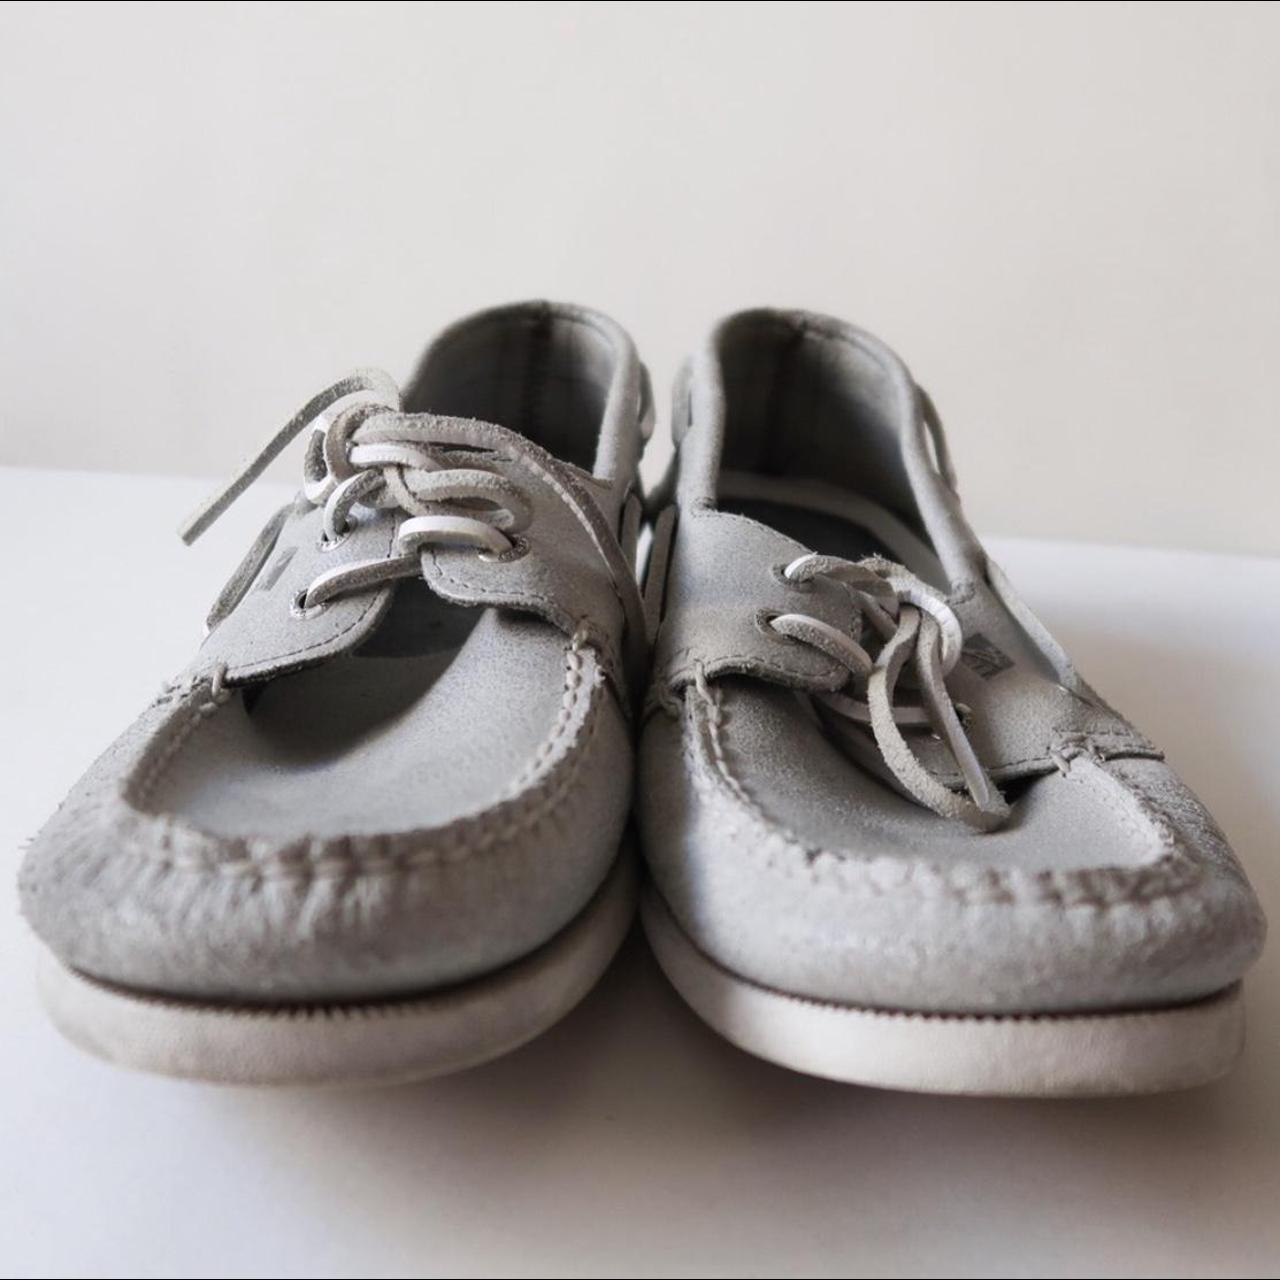 Product Image 2 - Sperry Topsider Boat Shoes
Size 10